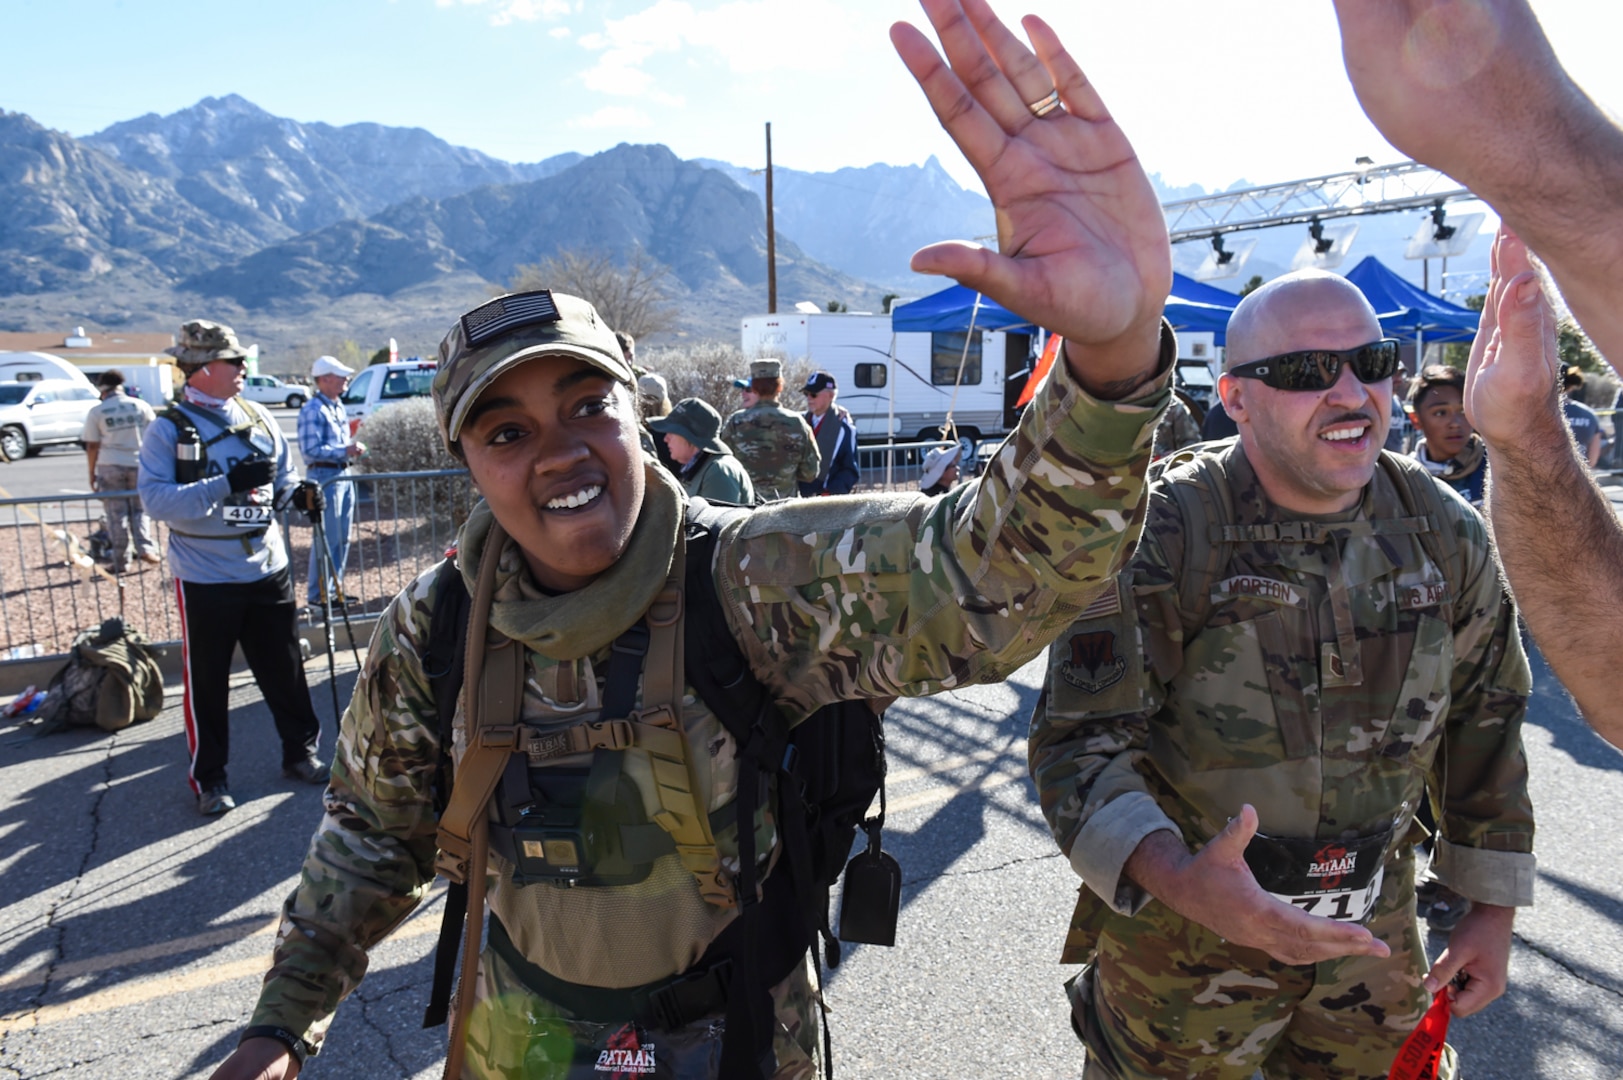 Staff Sgt. Toyelle Rickson is all smiles after completing the 2019 Bataan Memorial Death March in nine hours and 49 minutes. Having never participated in a marathon before and unable to train for this year's march like she wanted to, Rickson was extremely pleased with her results.